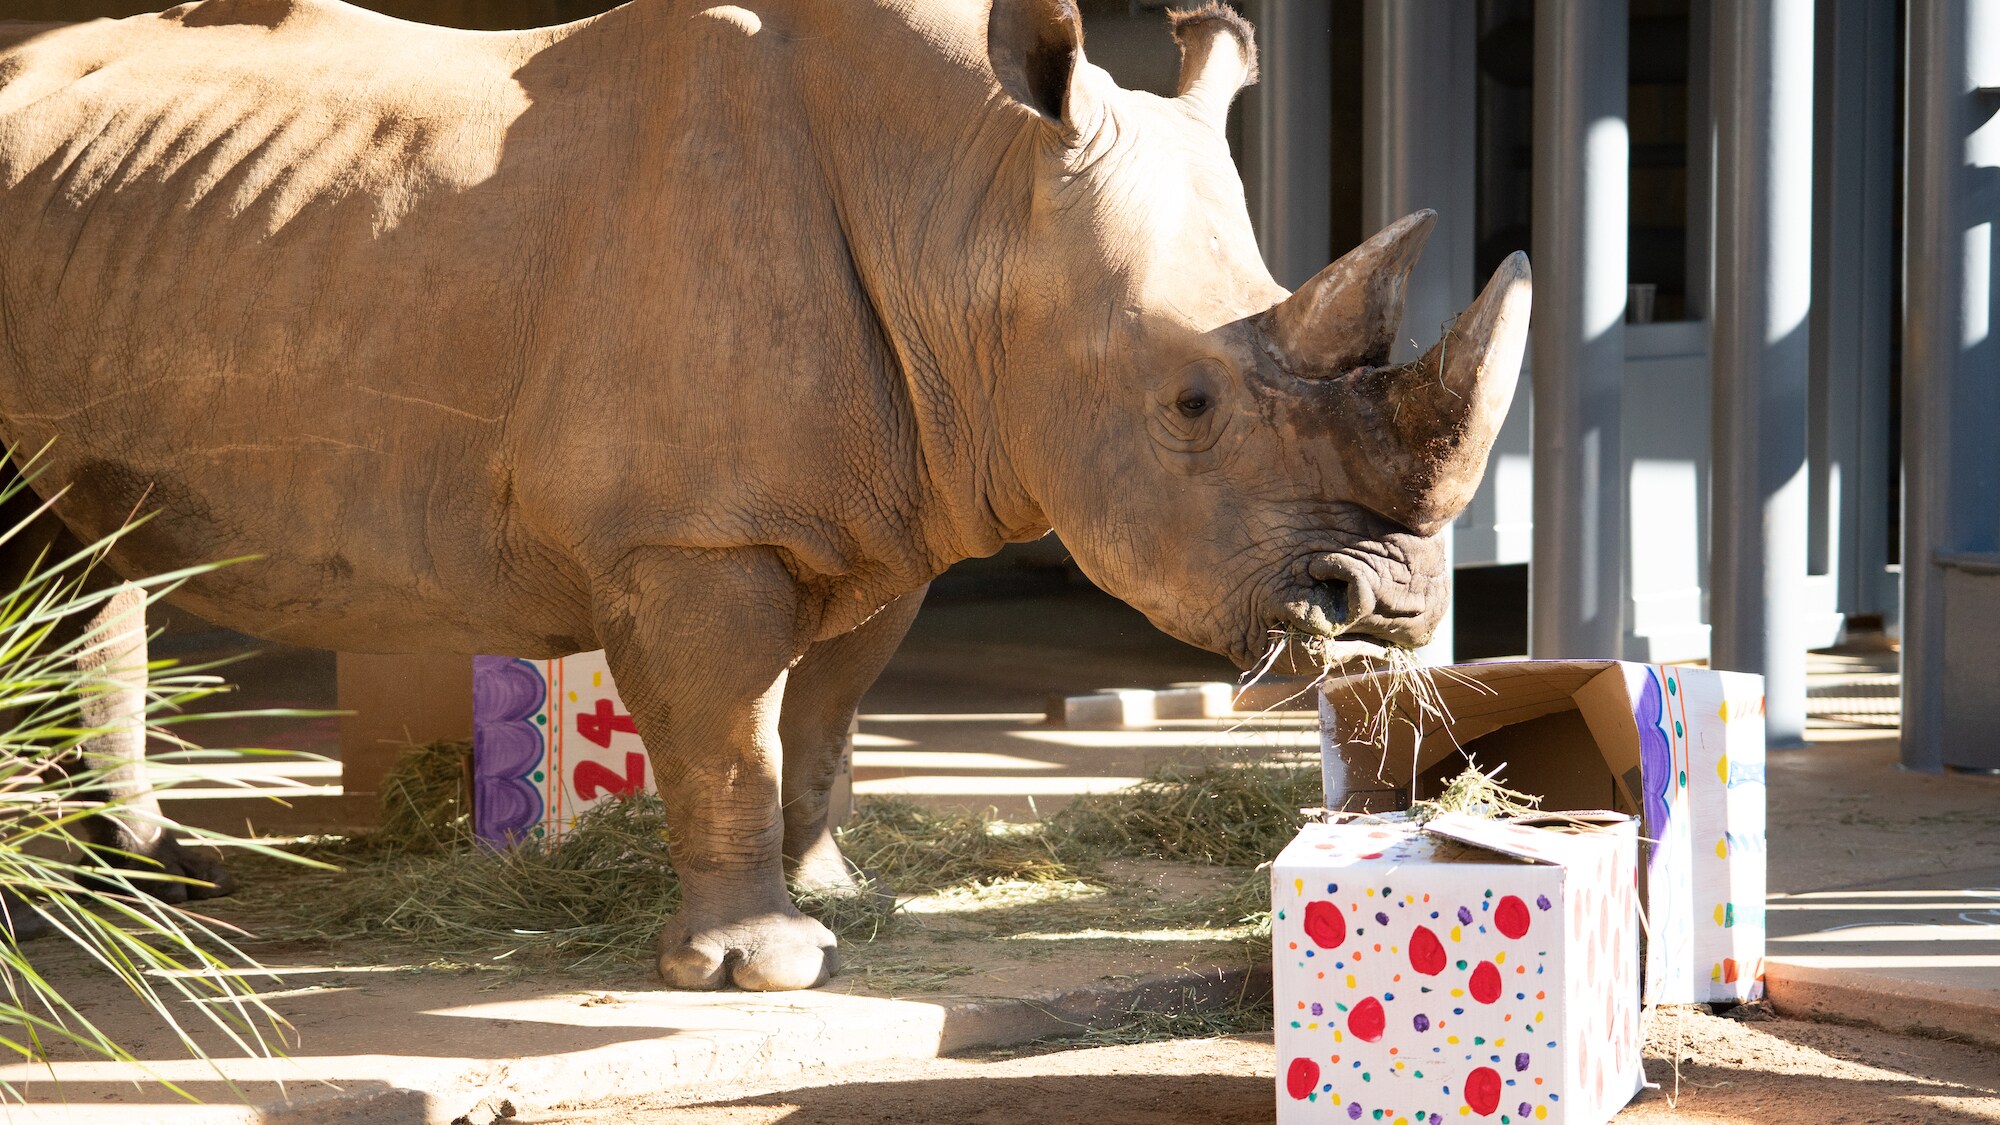 The keepers have put together a couple of surprises for Dugan, the Southern White Rhino, to celebrate his 24th birthday. The birthday surprises include signs dedicated to him, boxes full of hay and a hay cake which he smashes. (Disney)